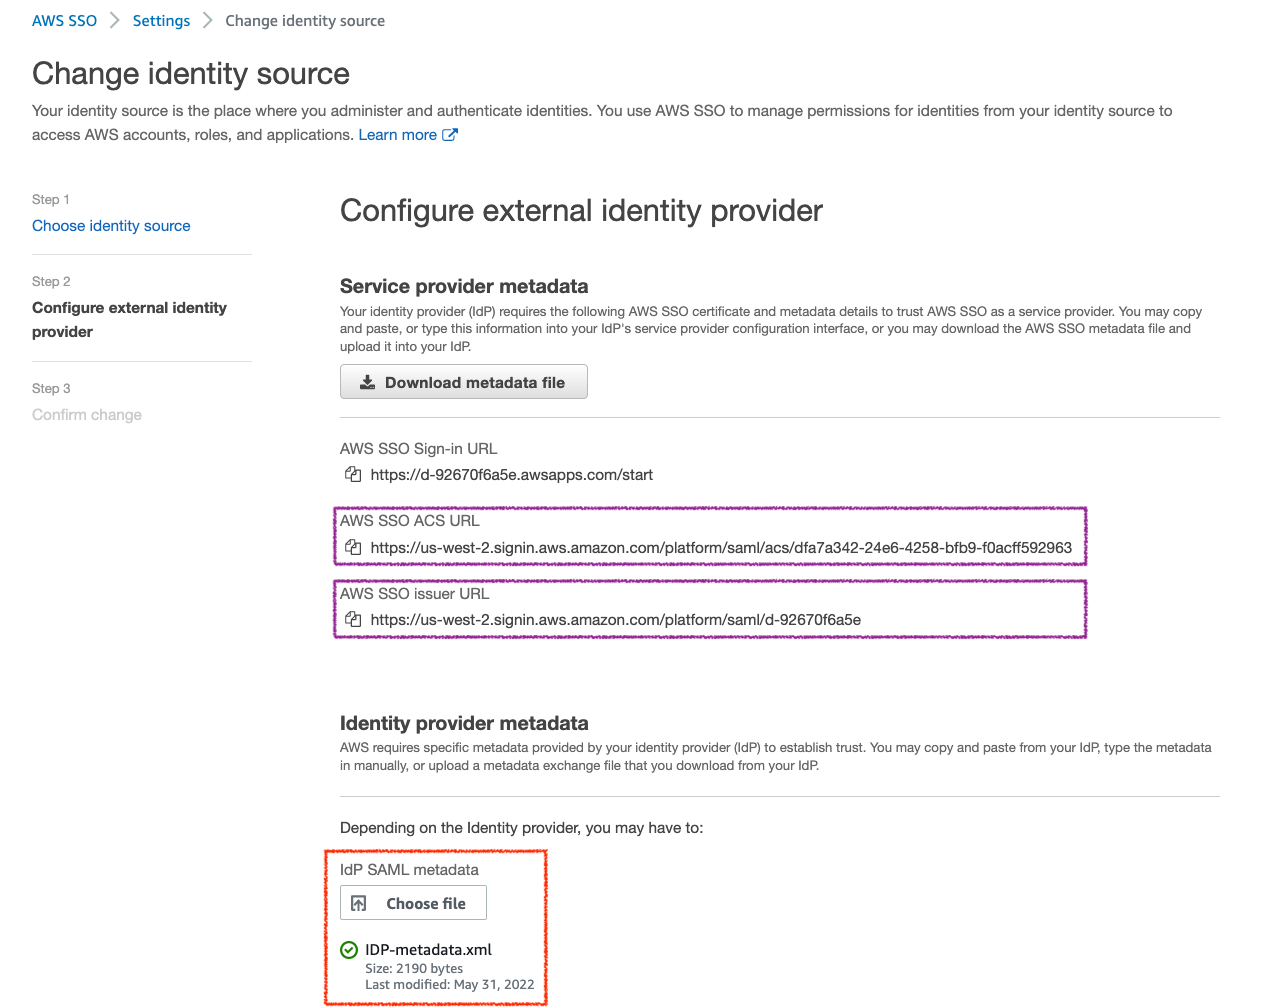 AWS-SSO-Change-identity-provider-metadata-from-download-file.png